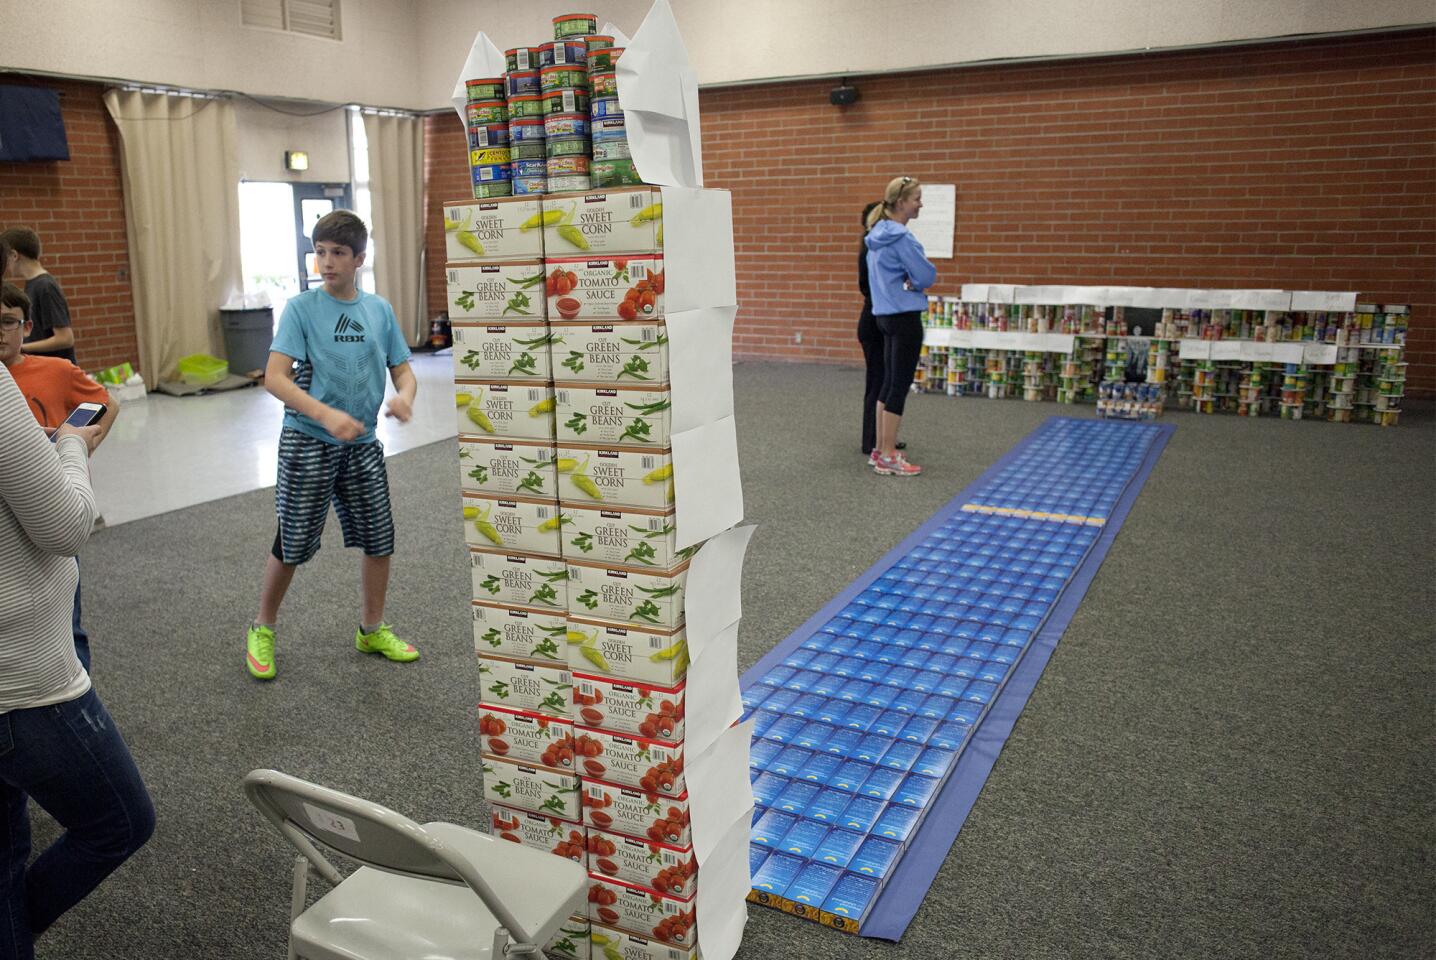 Lincoln Elementary School students construct a replica of the Lincoln Memorial, which includes the Reflecting Pool and Washington Monument, from cans and food boxes.